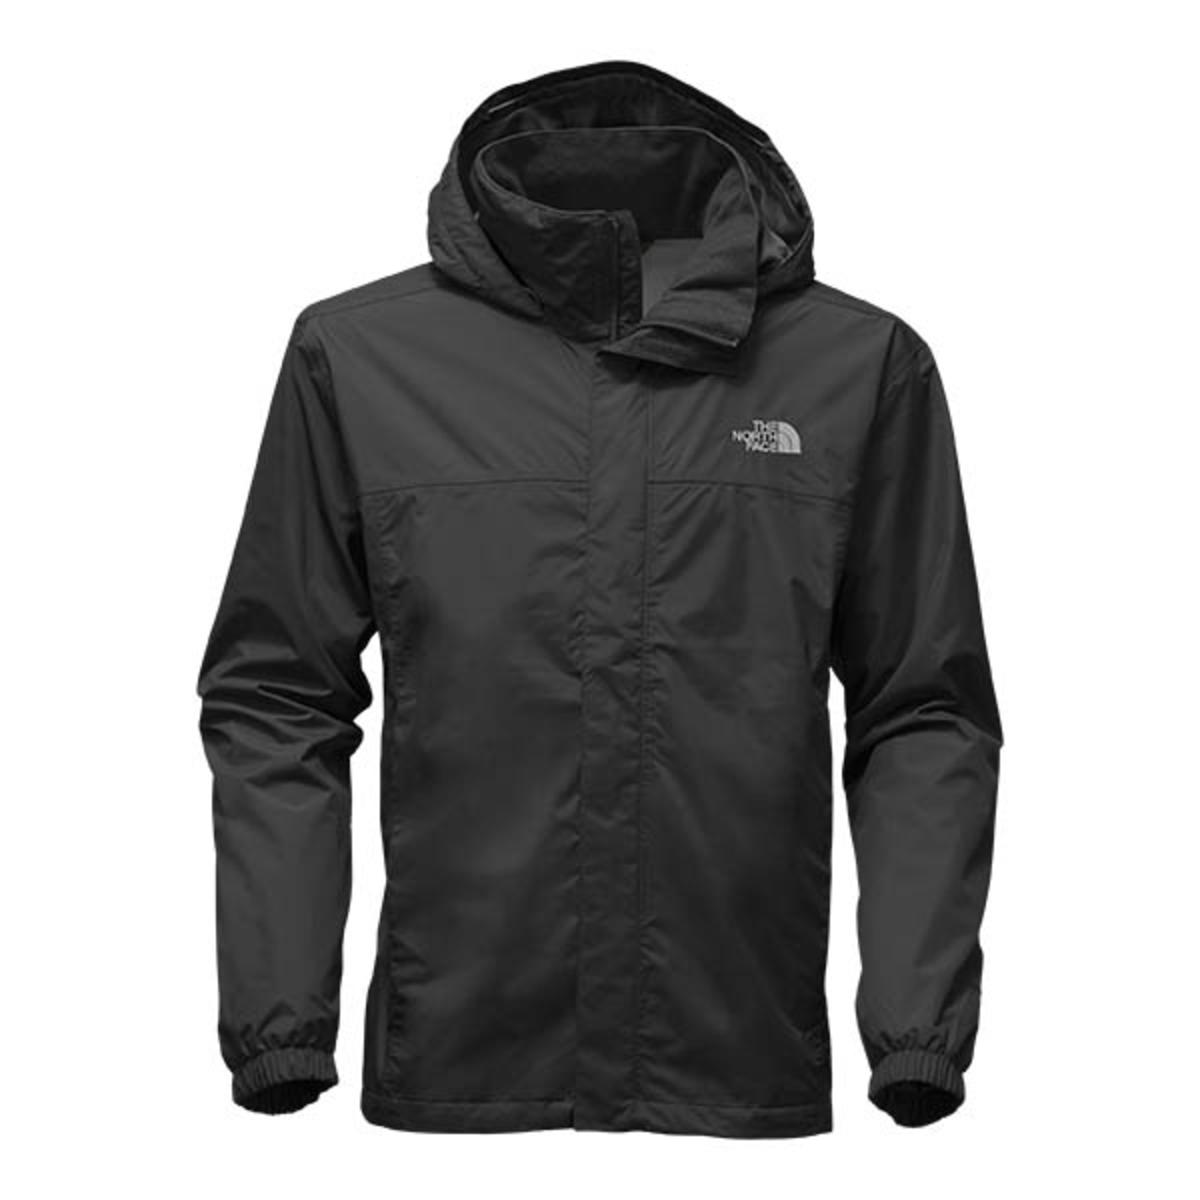 The North Face Men's Resolve 2 Jacket – Black/Black | Conquer the Cold ...